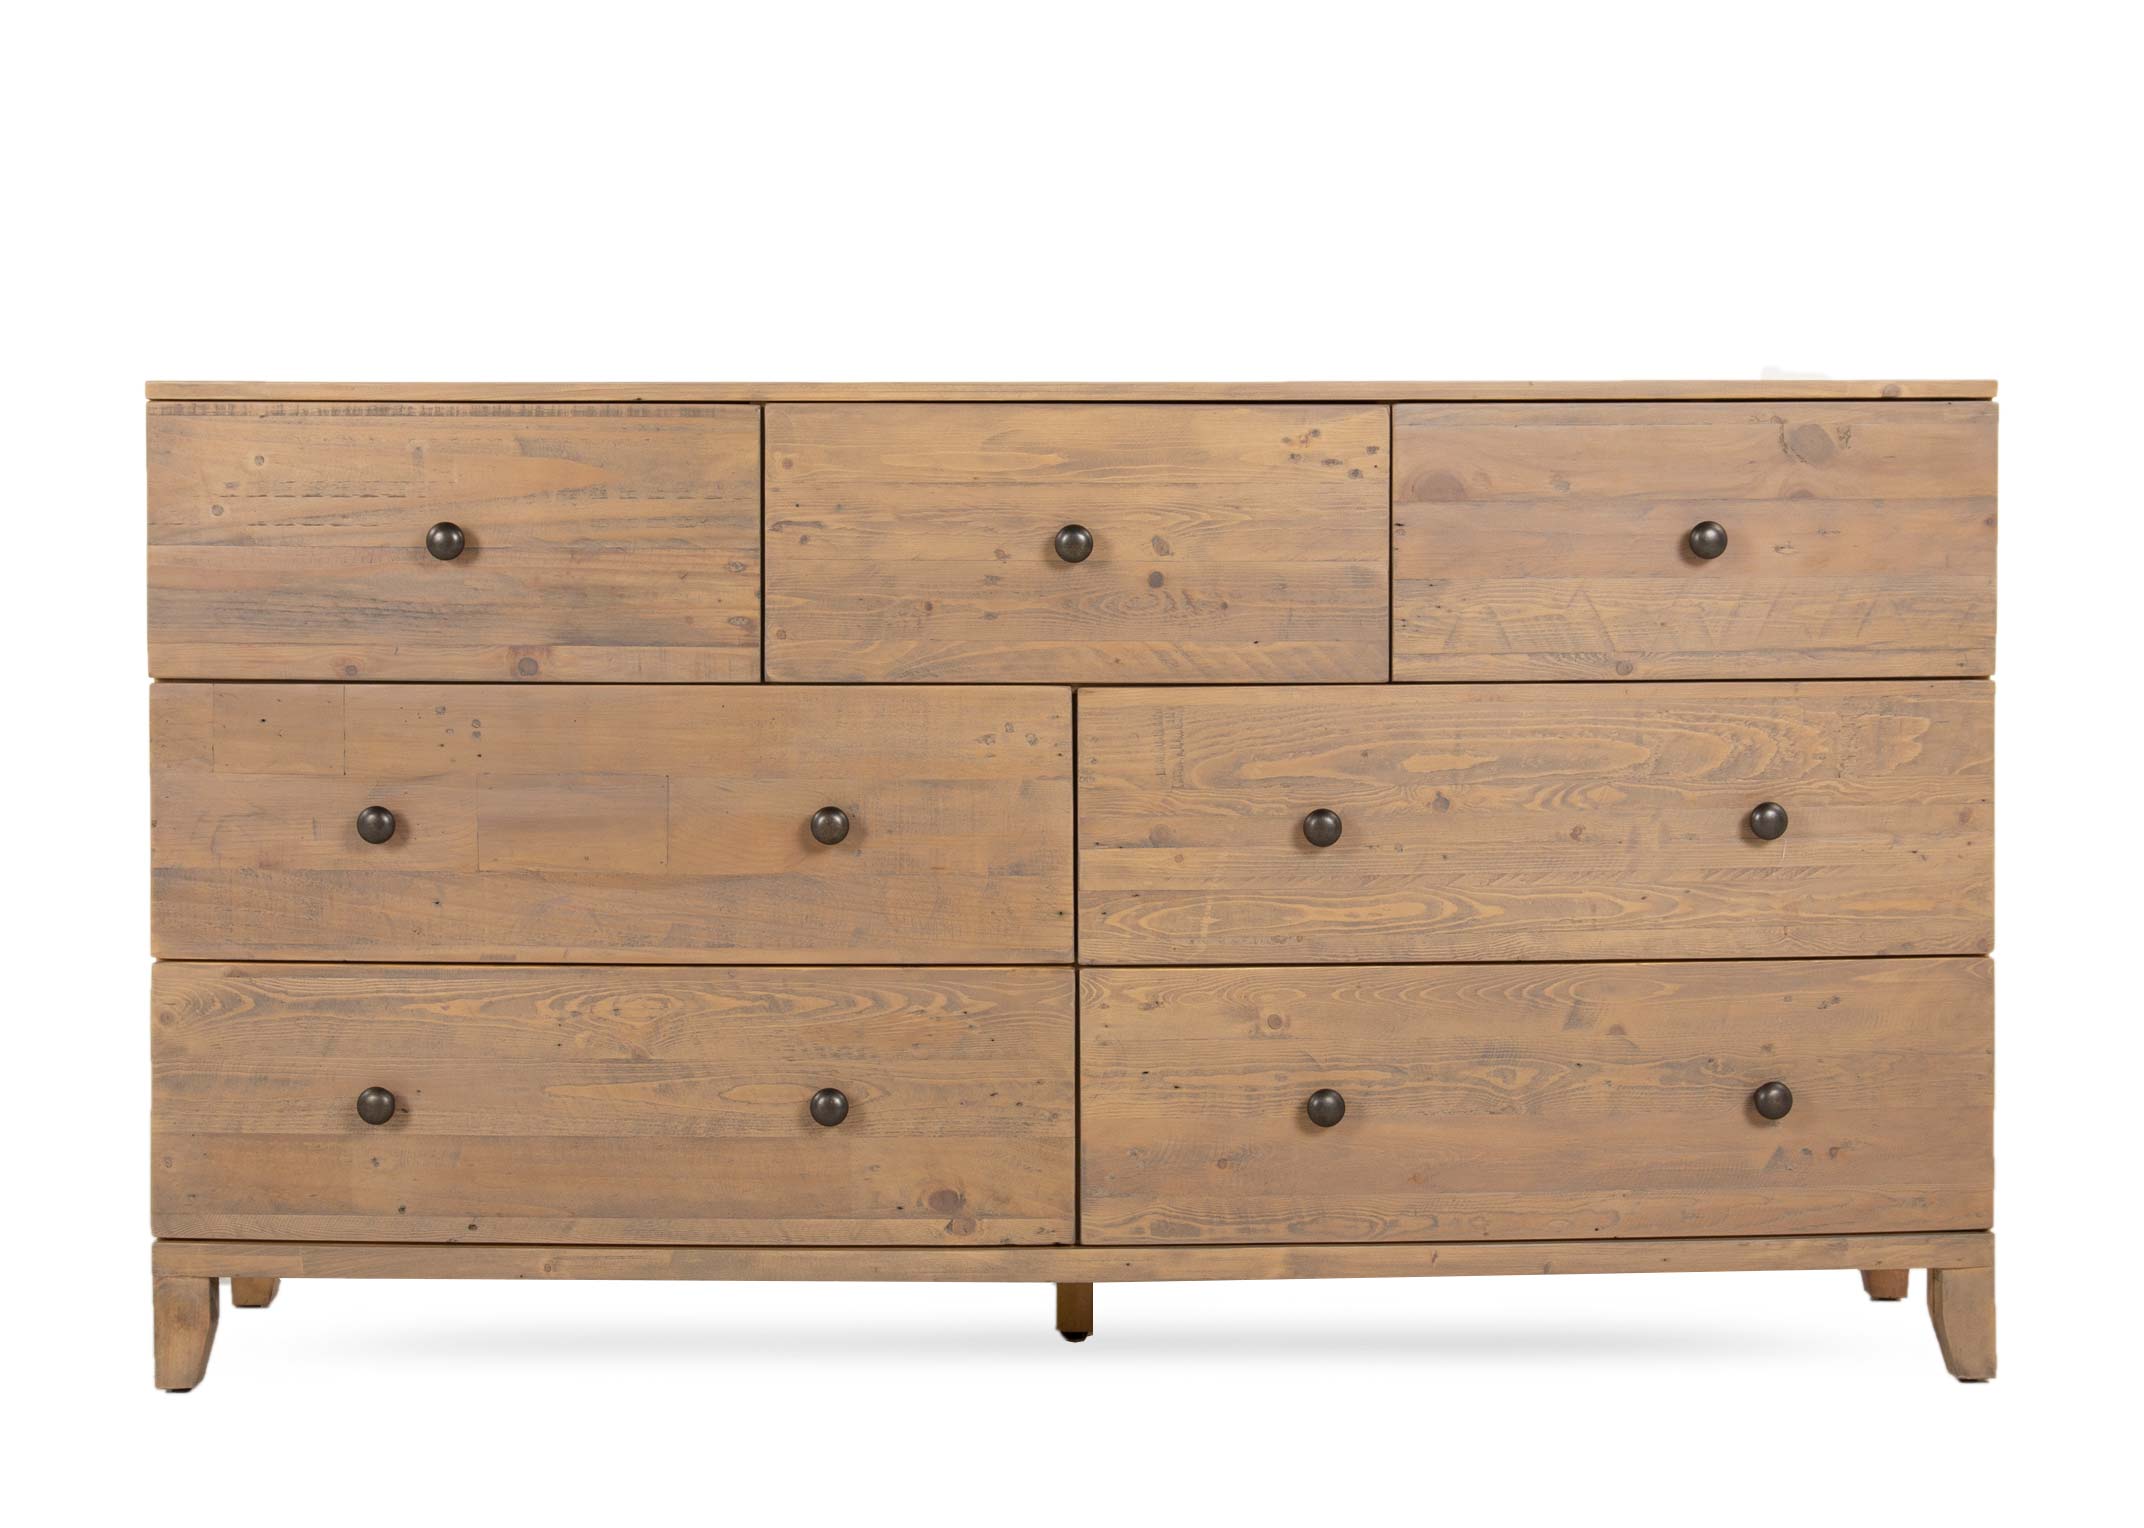 The Valora 7 Drawer Dresser in Juniper Green, Marco Polo Imports